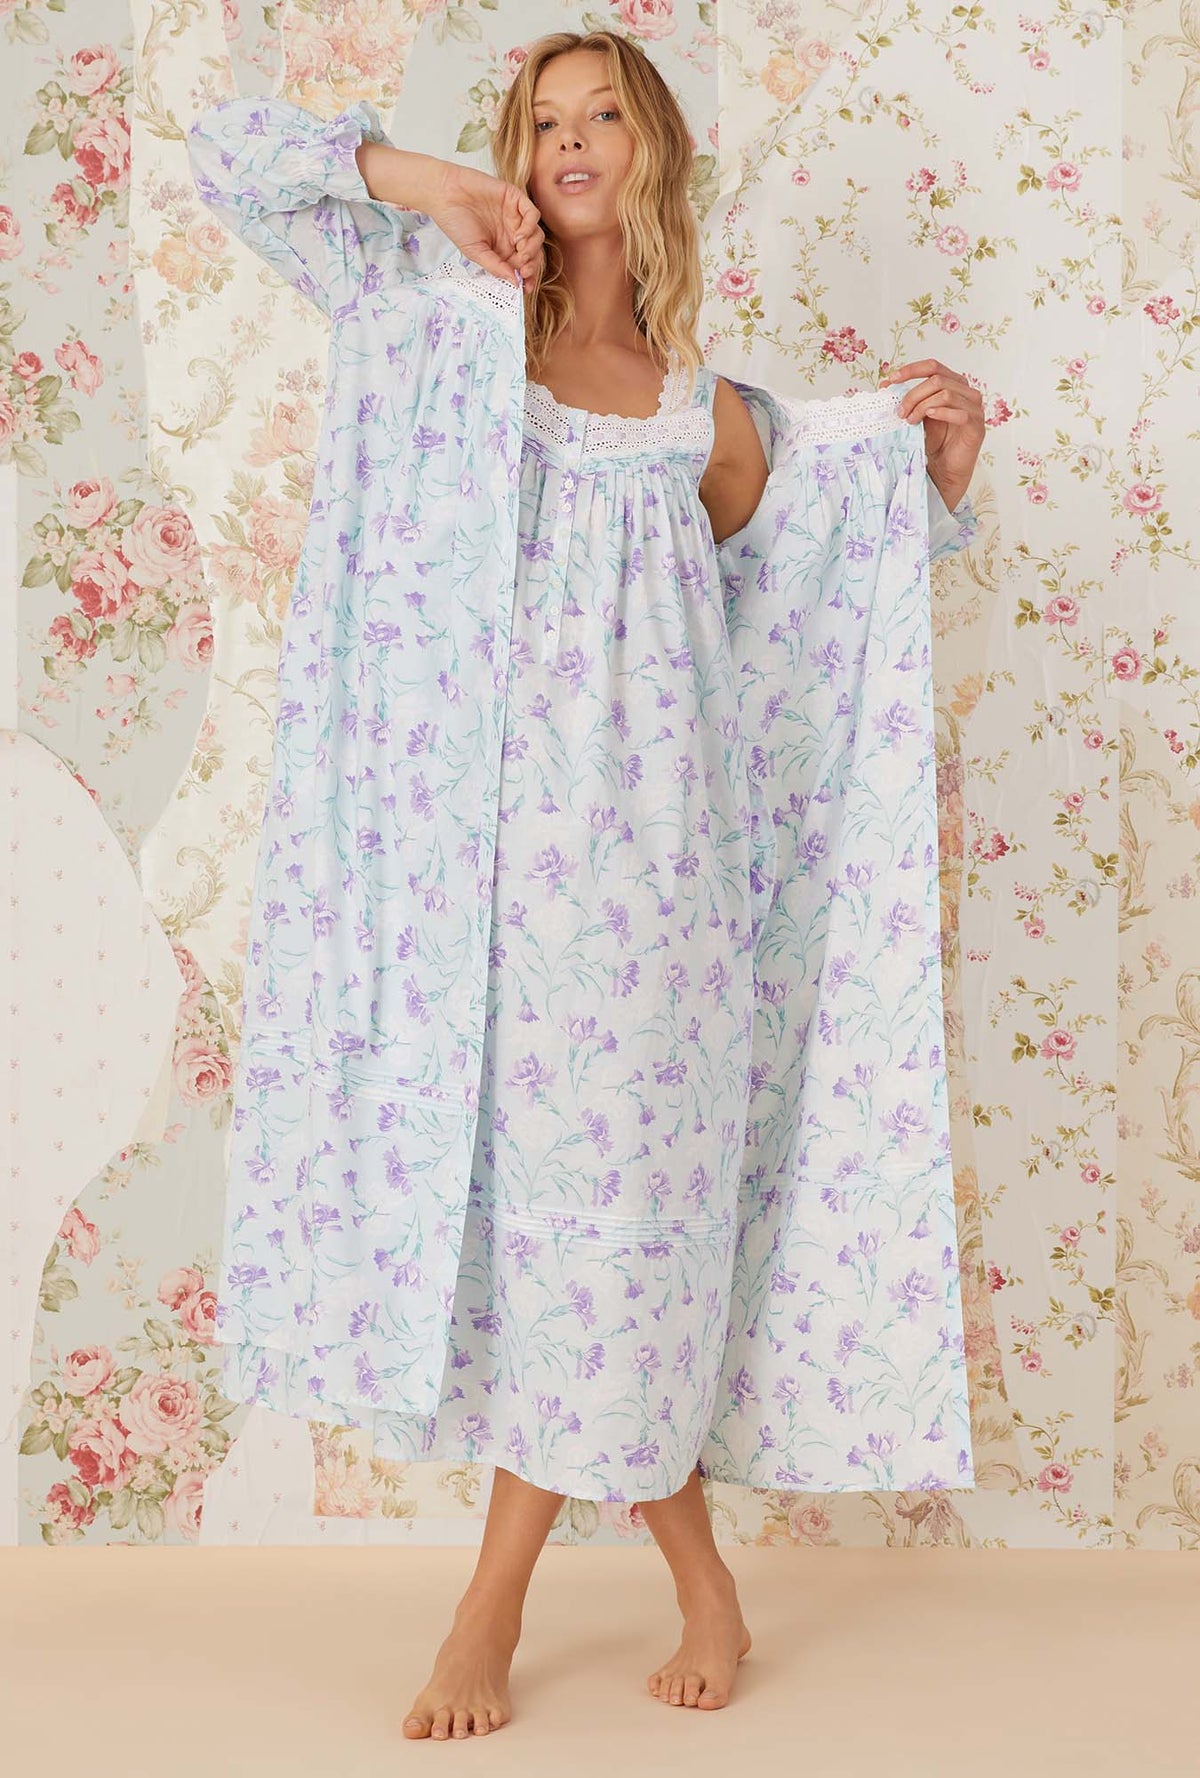 A lady wearing white sleeveless Eileen Nightgown with lavender carnations print